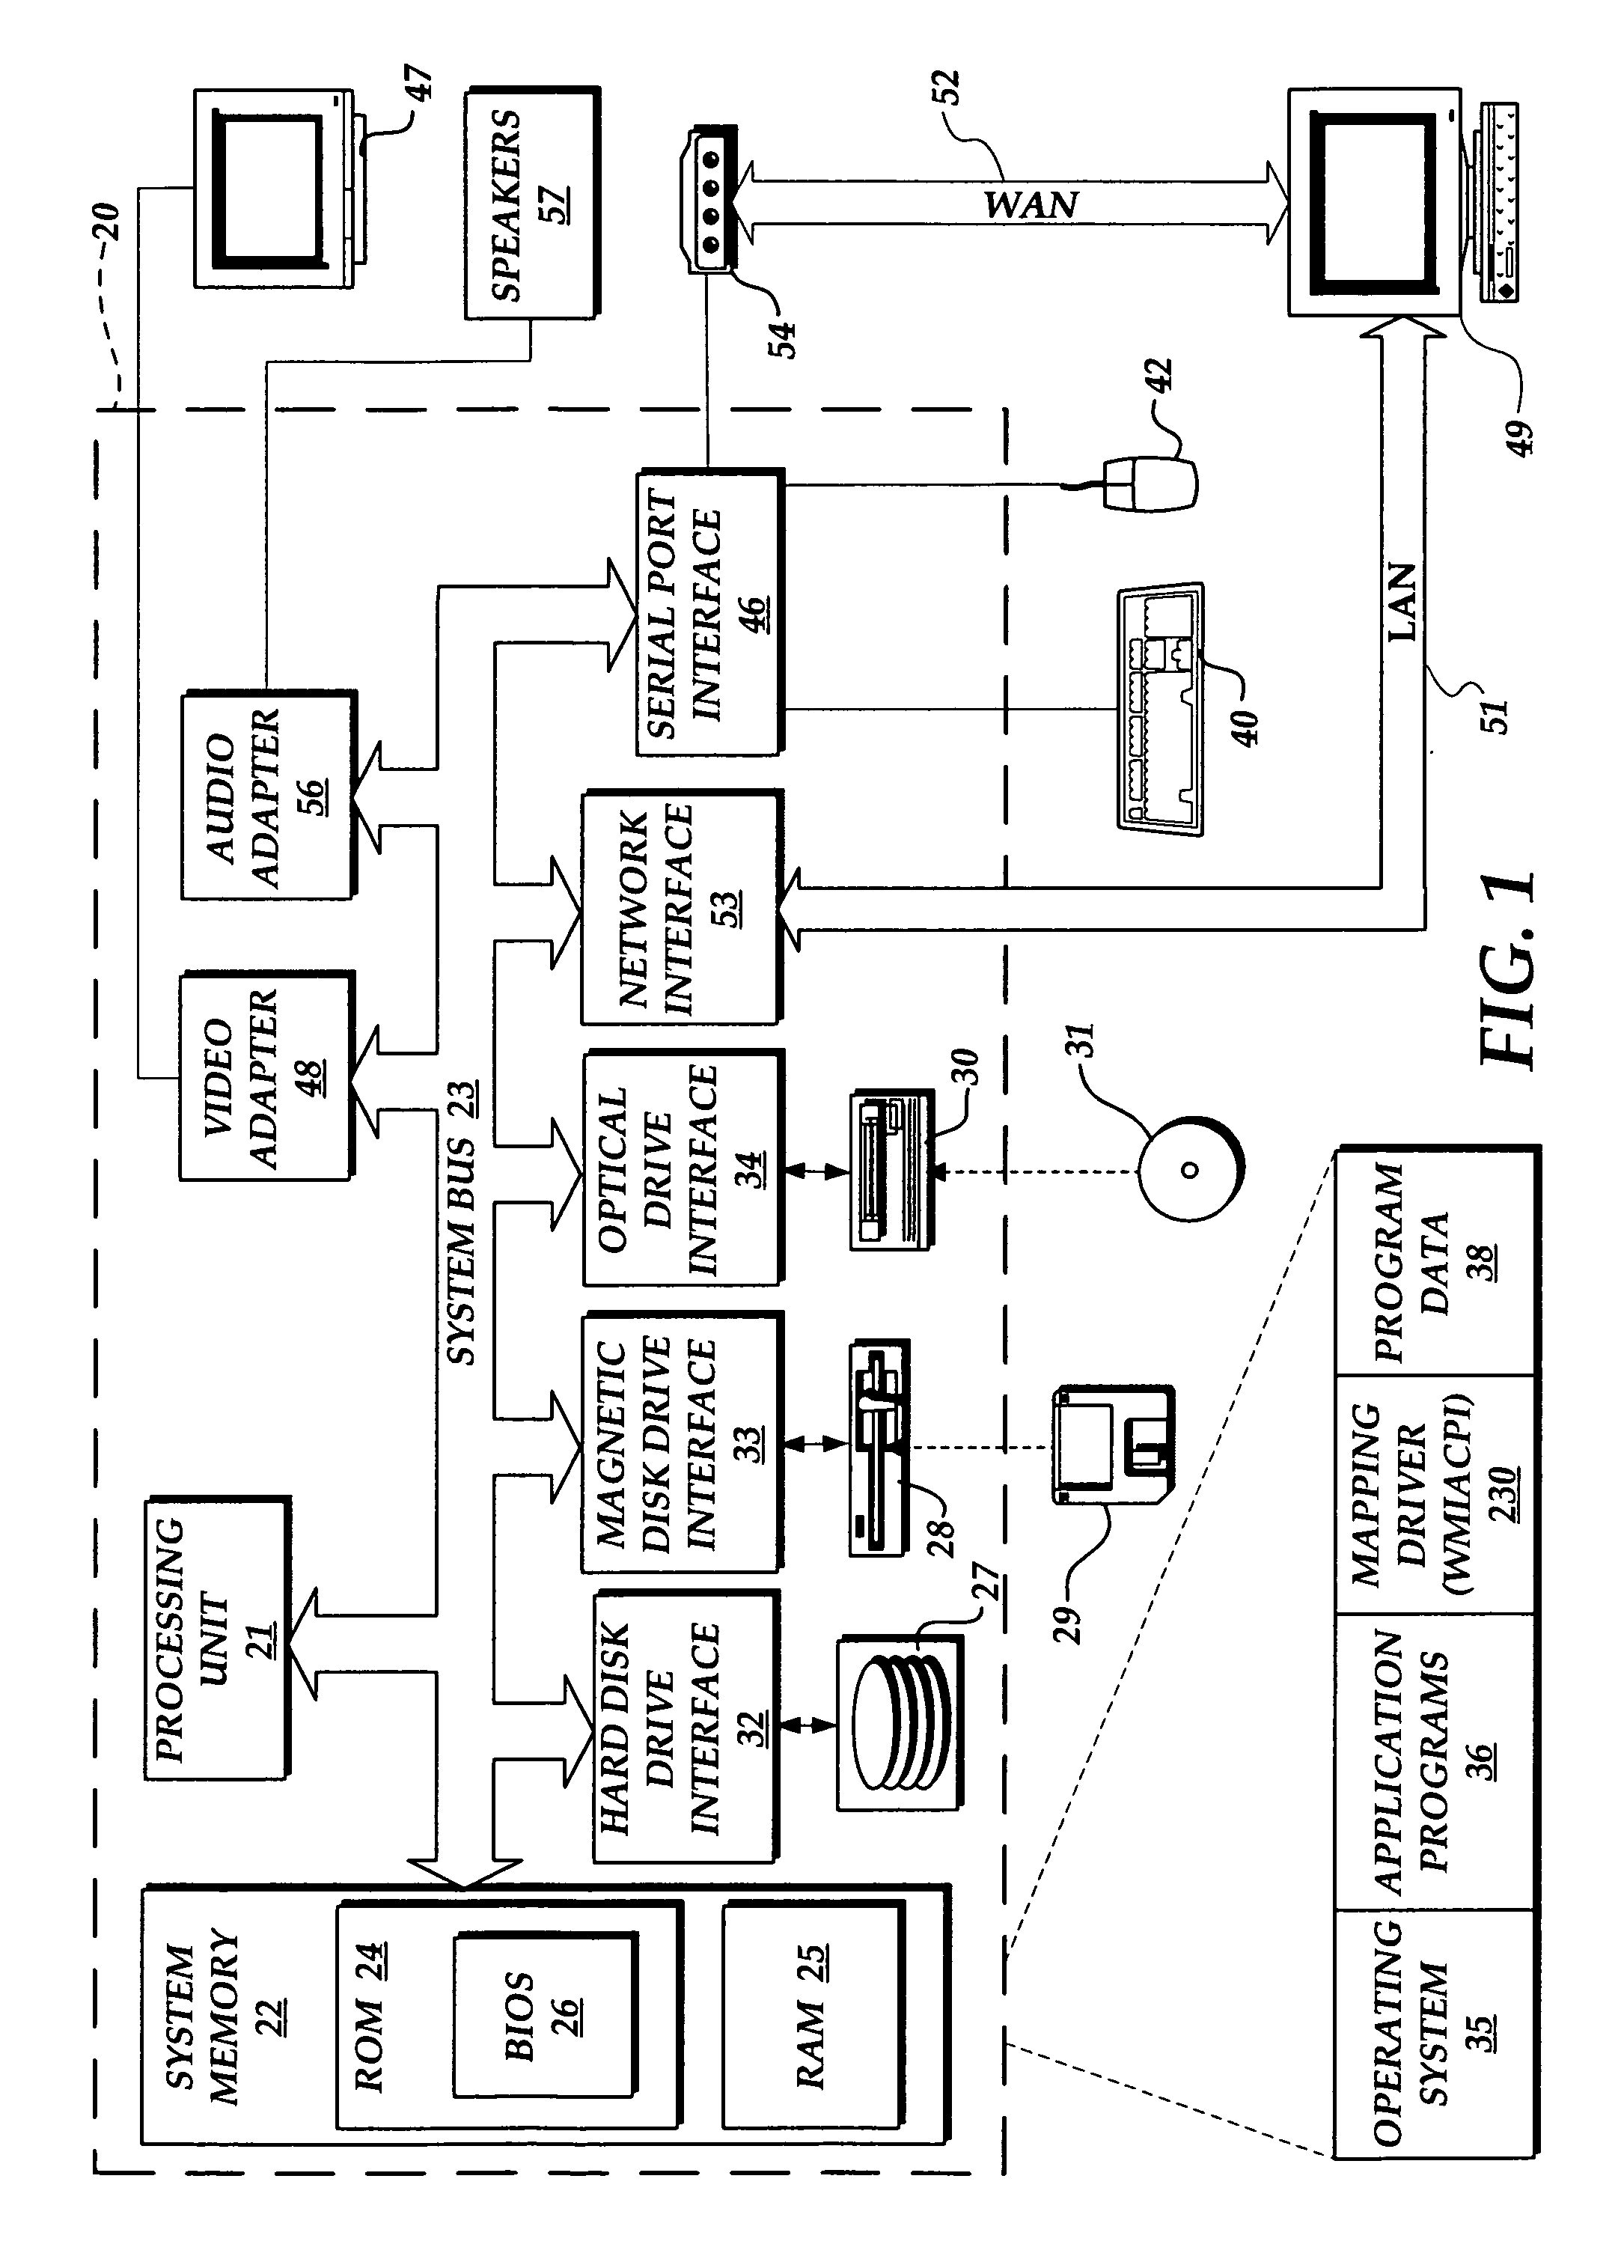 System and method for accessing information made available by a kernel mode driver